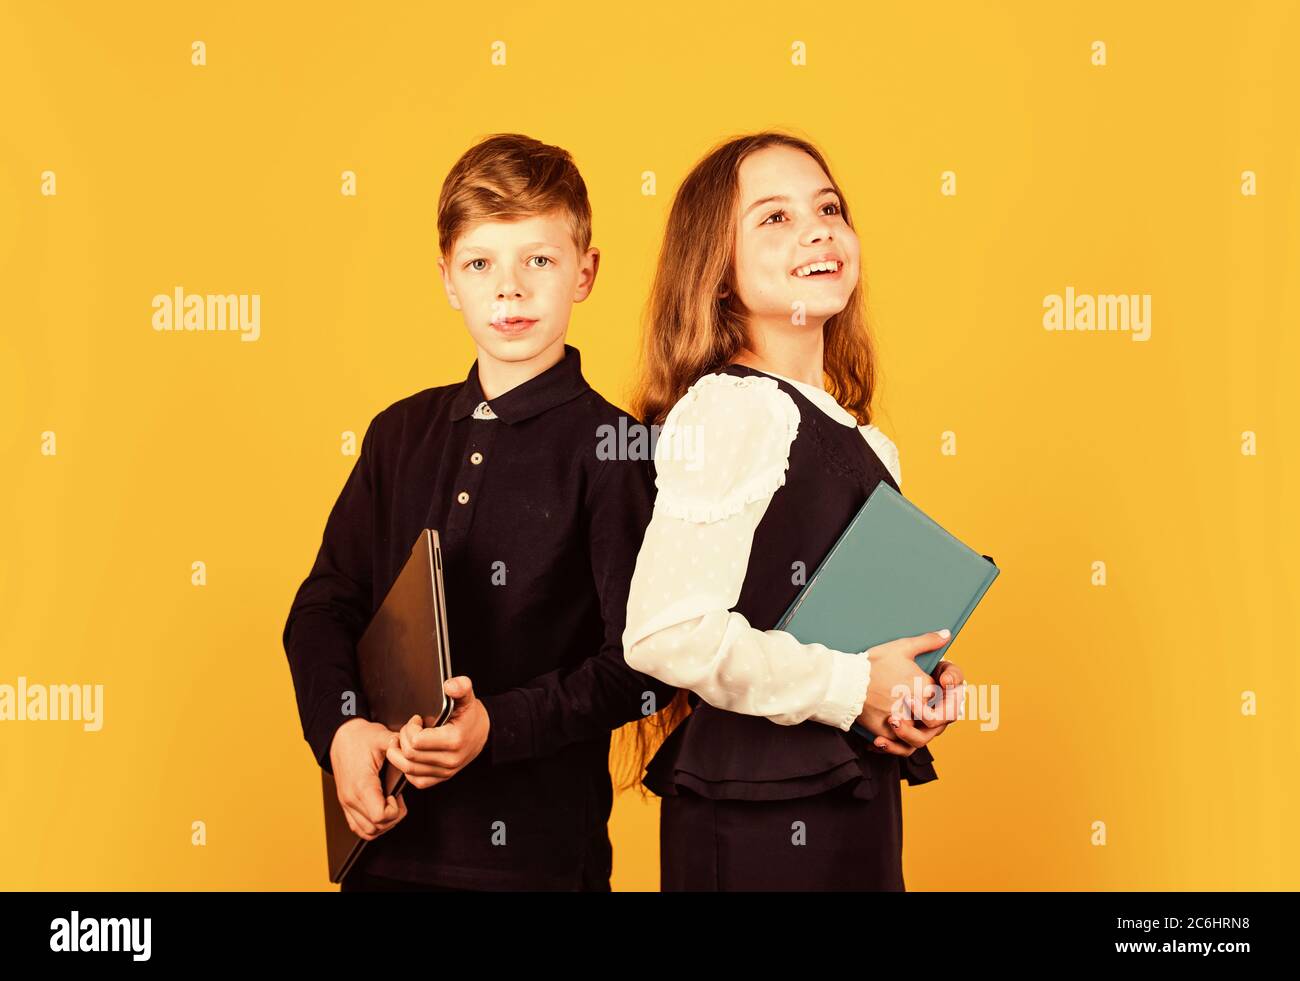 Learning together we achieve great things. Happy children back to school. Childhood activities during school time. Childhood and development. Childhood care and education. Childhood days. Stock Photo